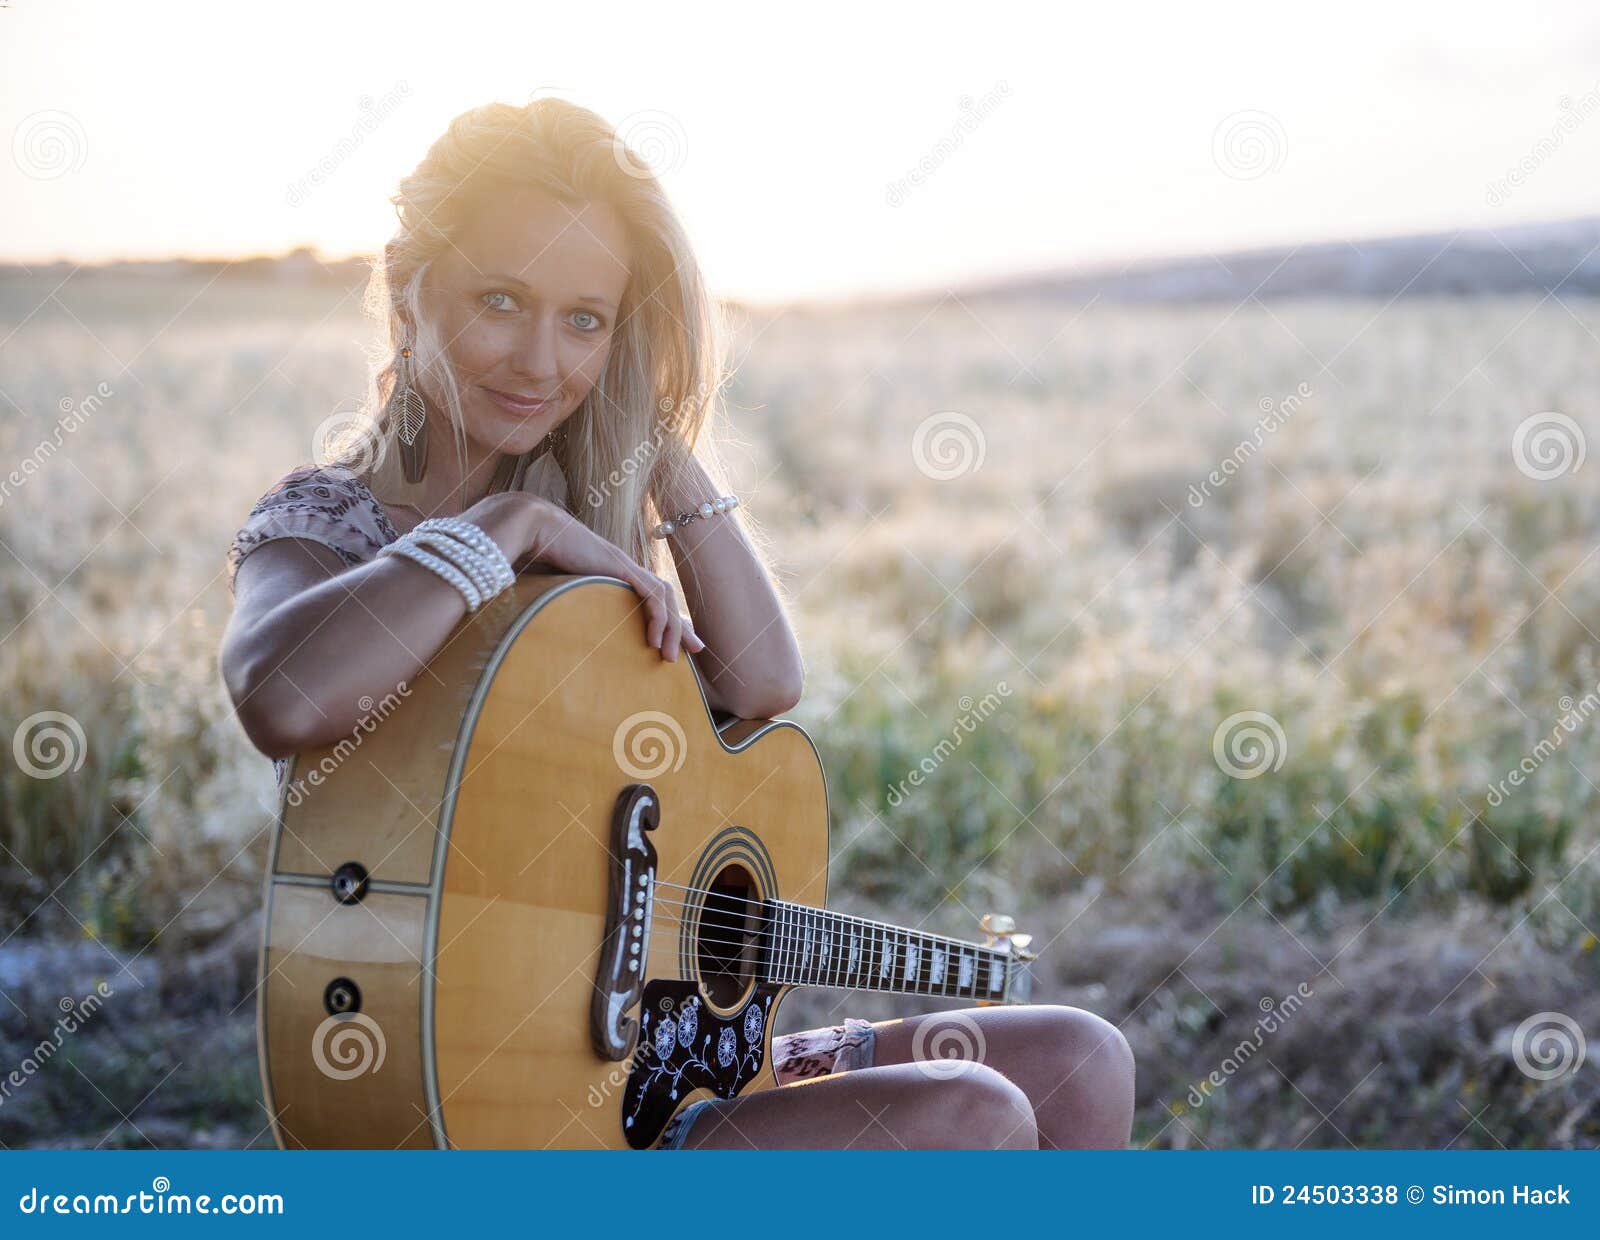 country girl and guitar 2